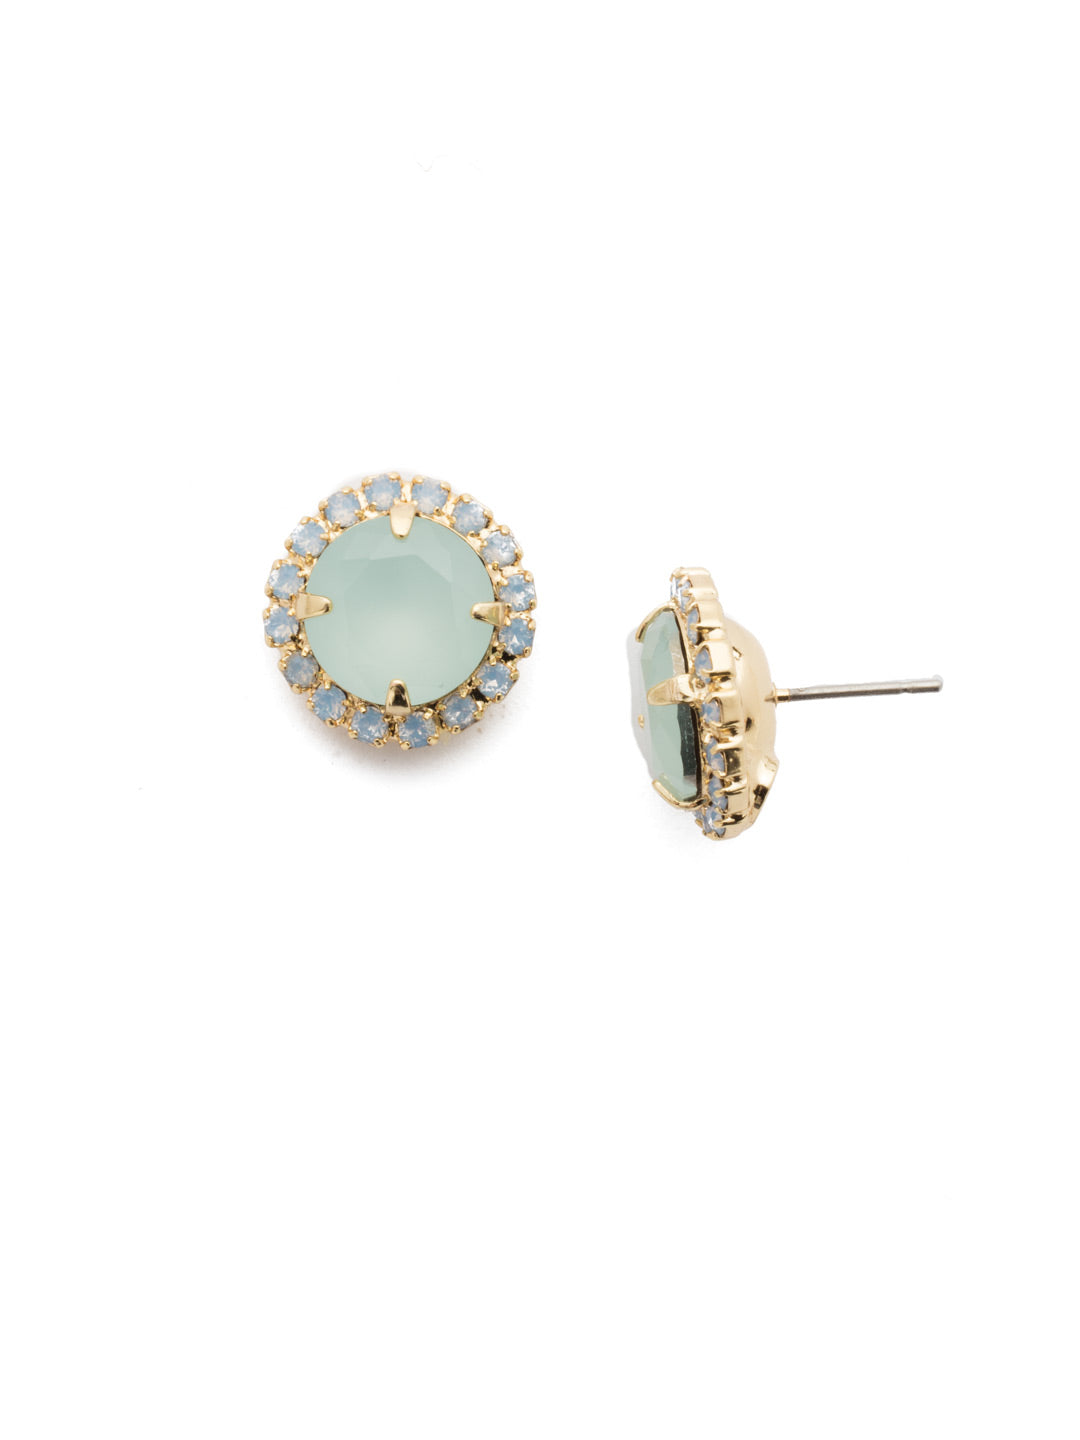 Haute Halo Stud Earring - ECX98BGGLN - A central round crystal with an elegant halo of gems embodies elegance and style. From Sorrelli's  Grand Lagoon collection in our Bright Gold-tone finish.